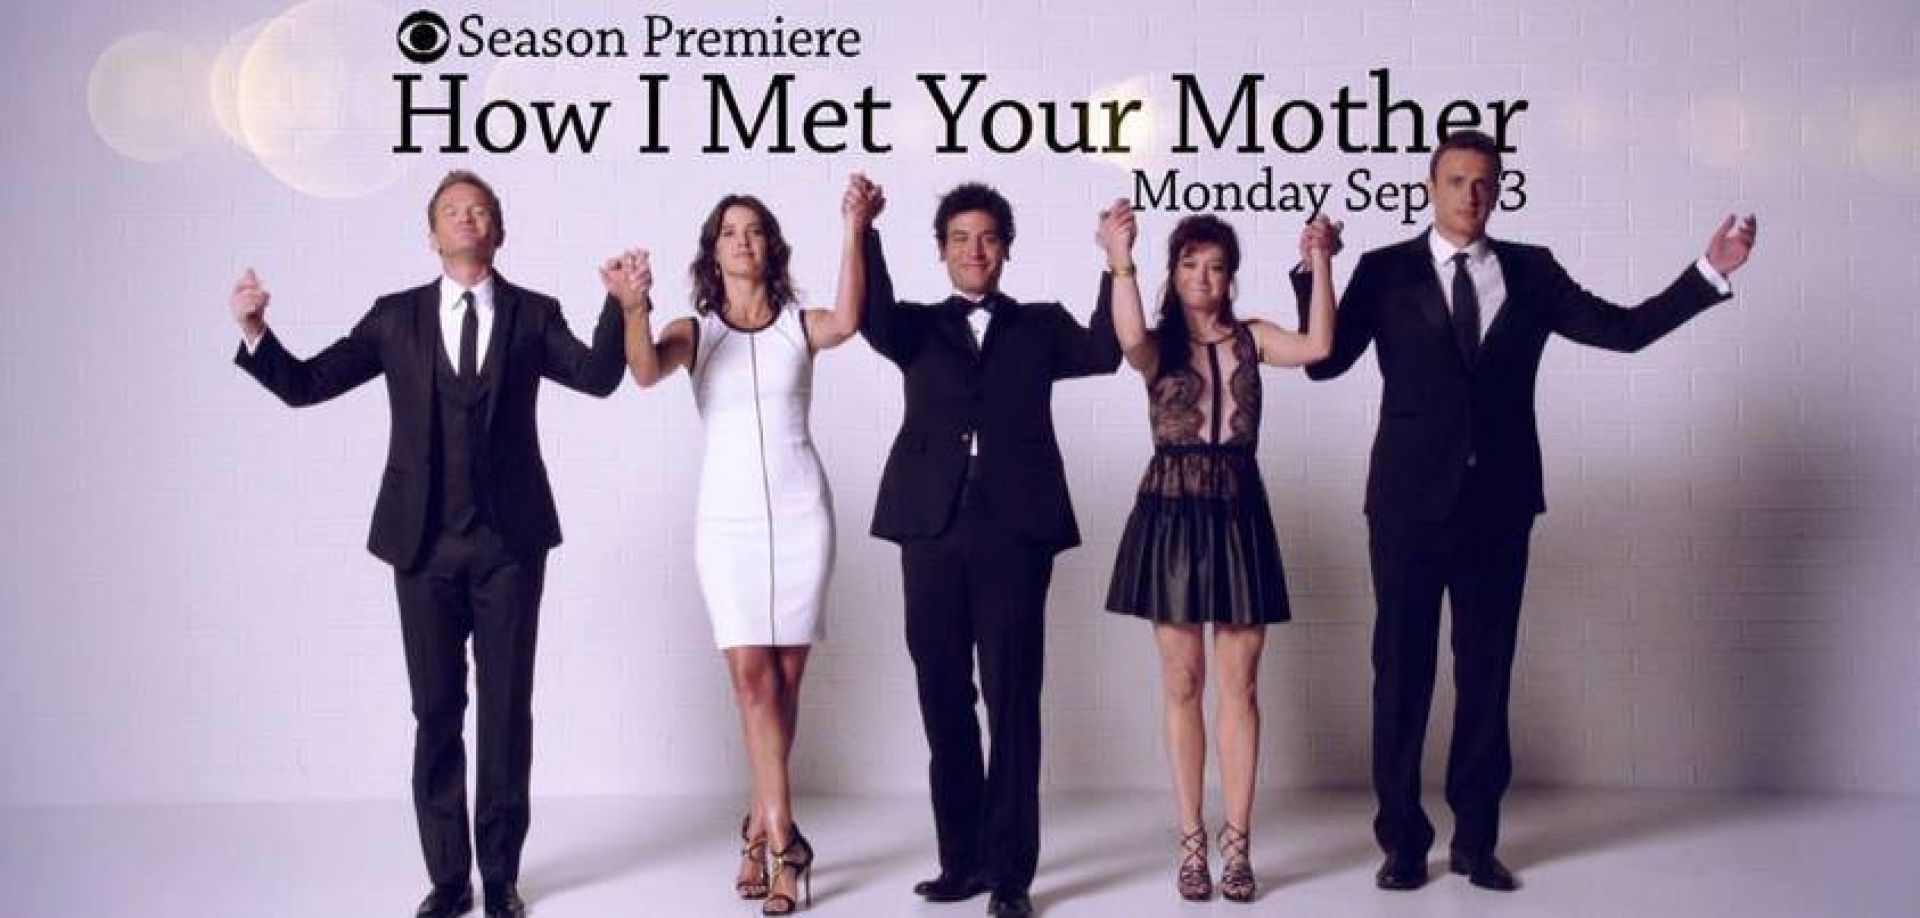 How I Met Your Mother Series Finale | What to Expect Tonight